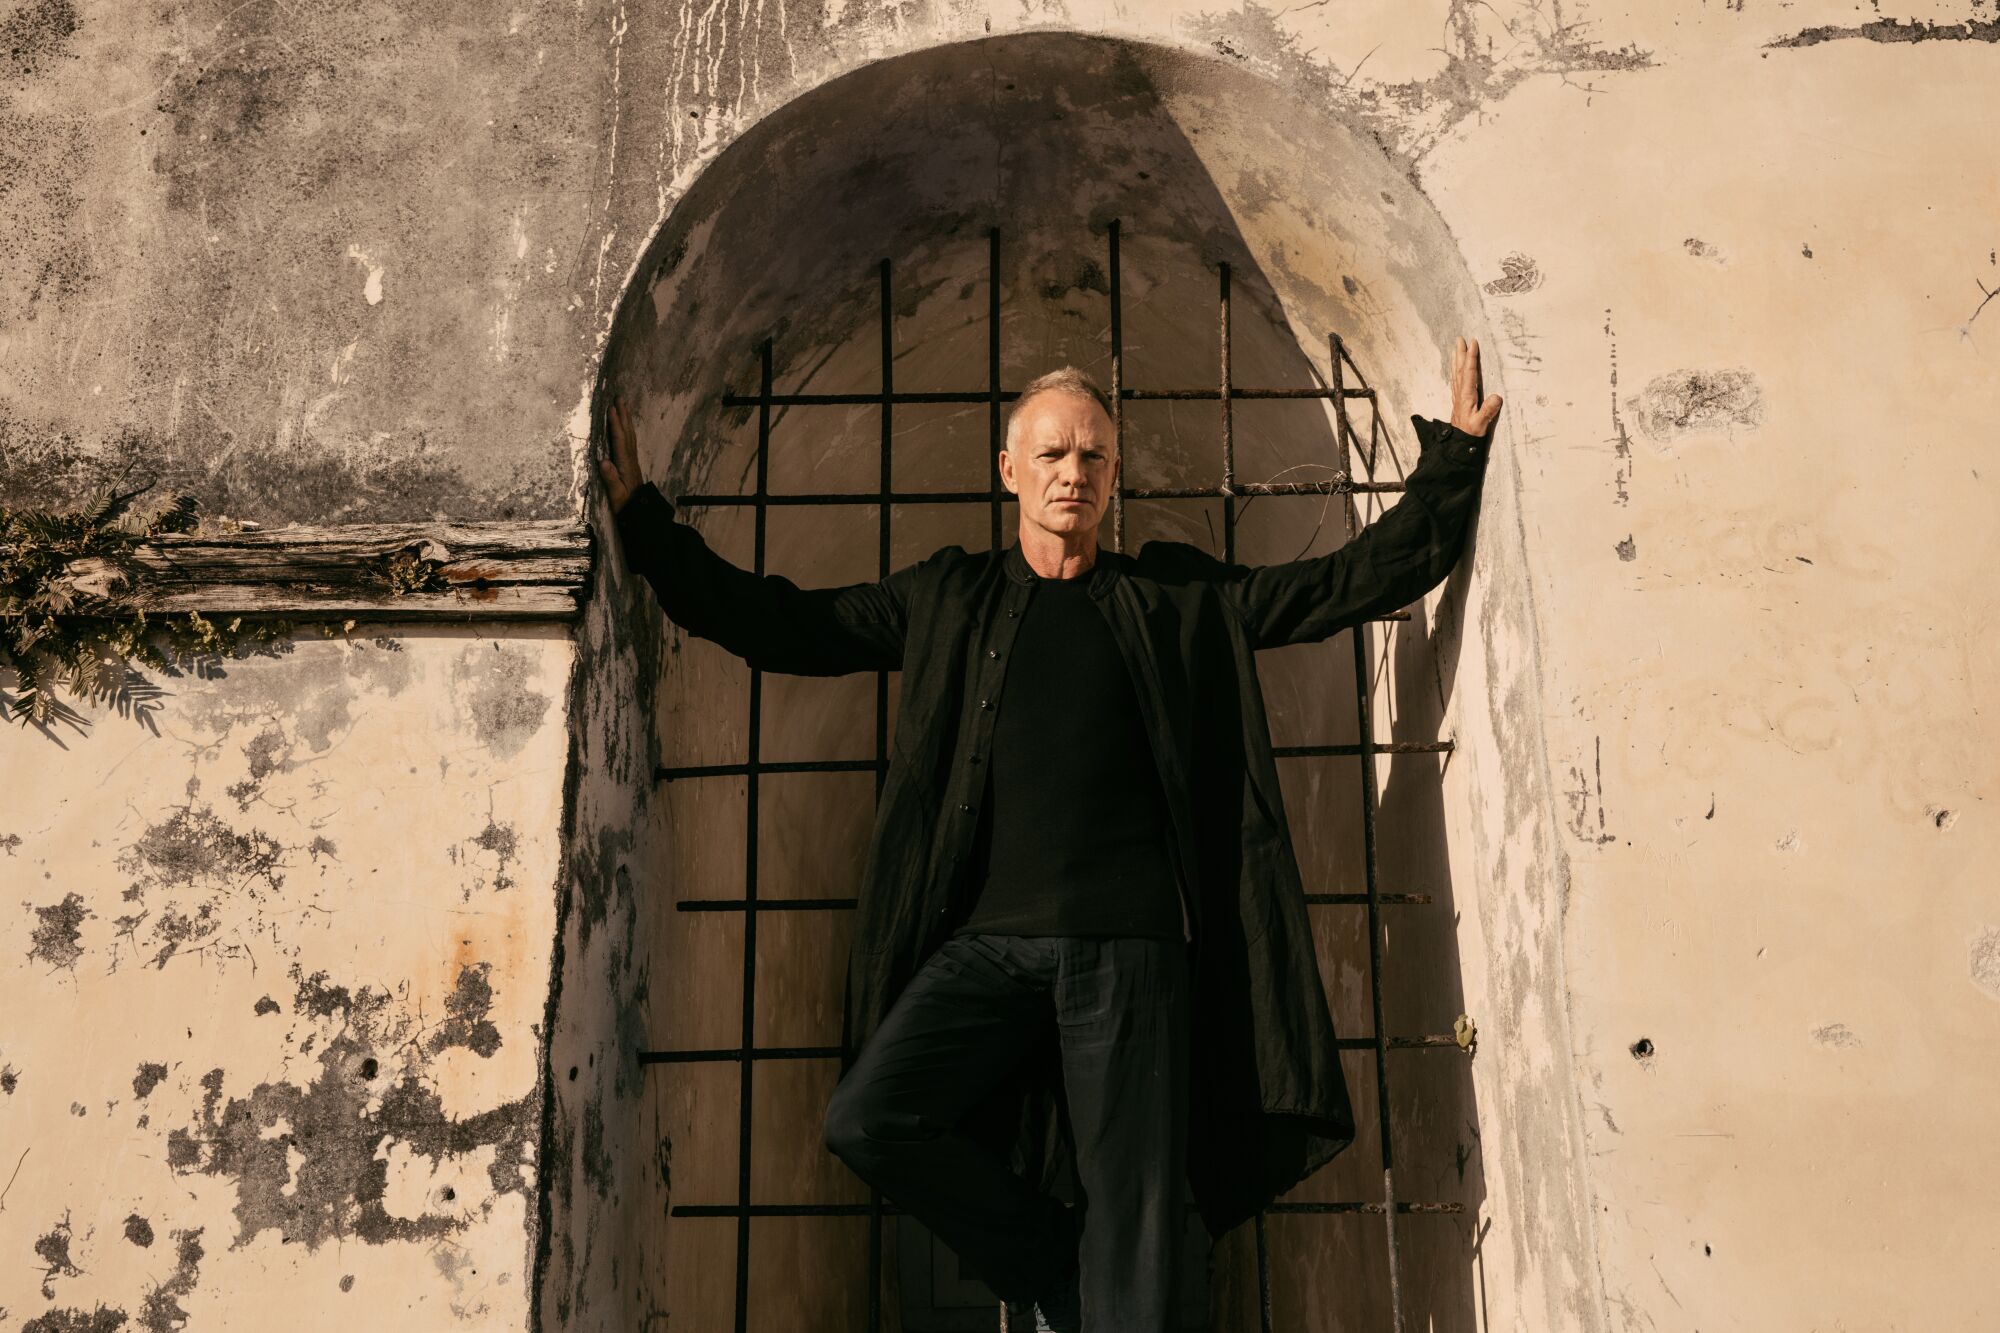 Sting stands in an archway.